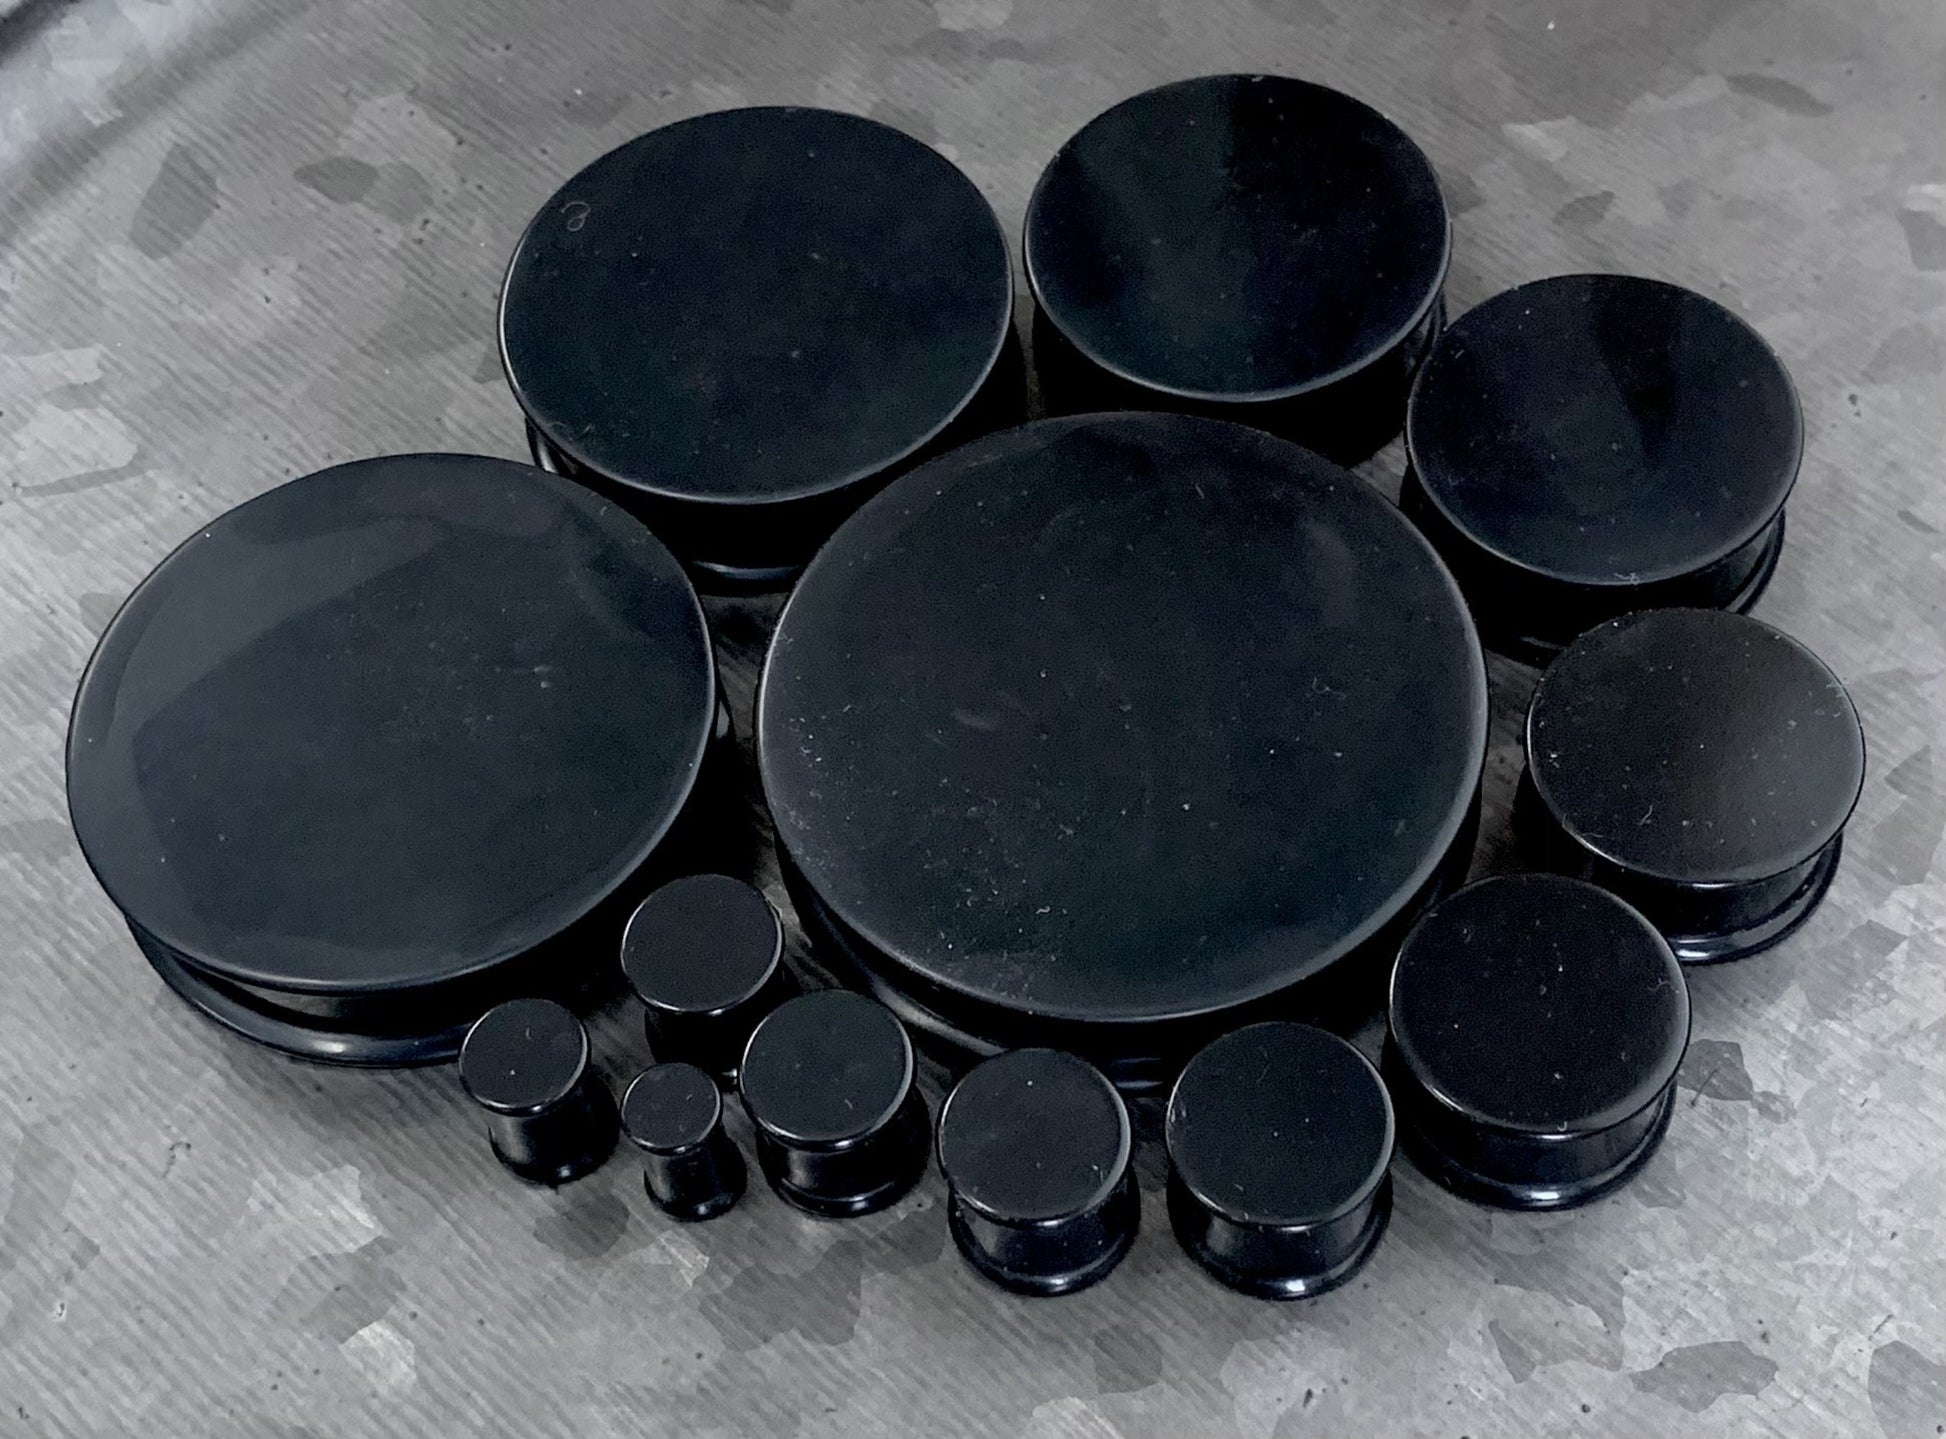 PAIR of Midnight Black Solid Silicone Double Flare Plugs